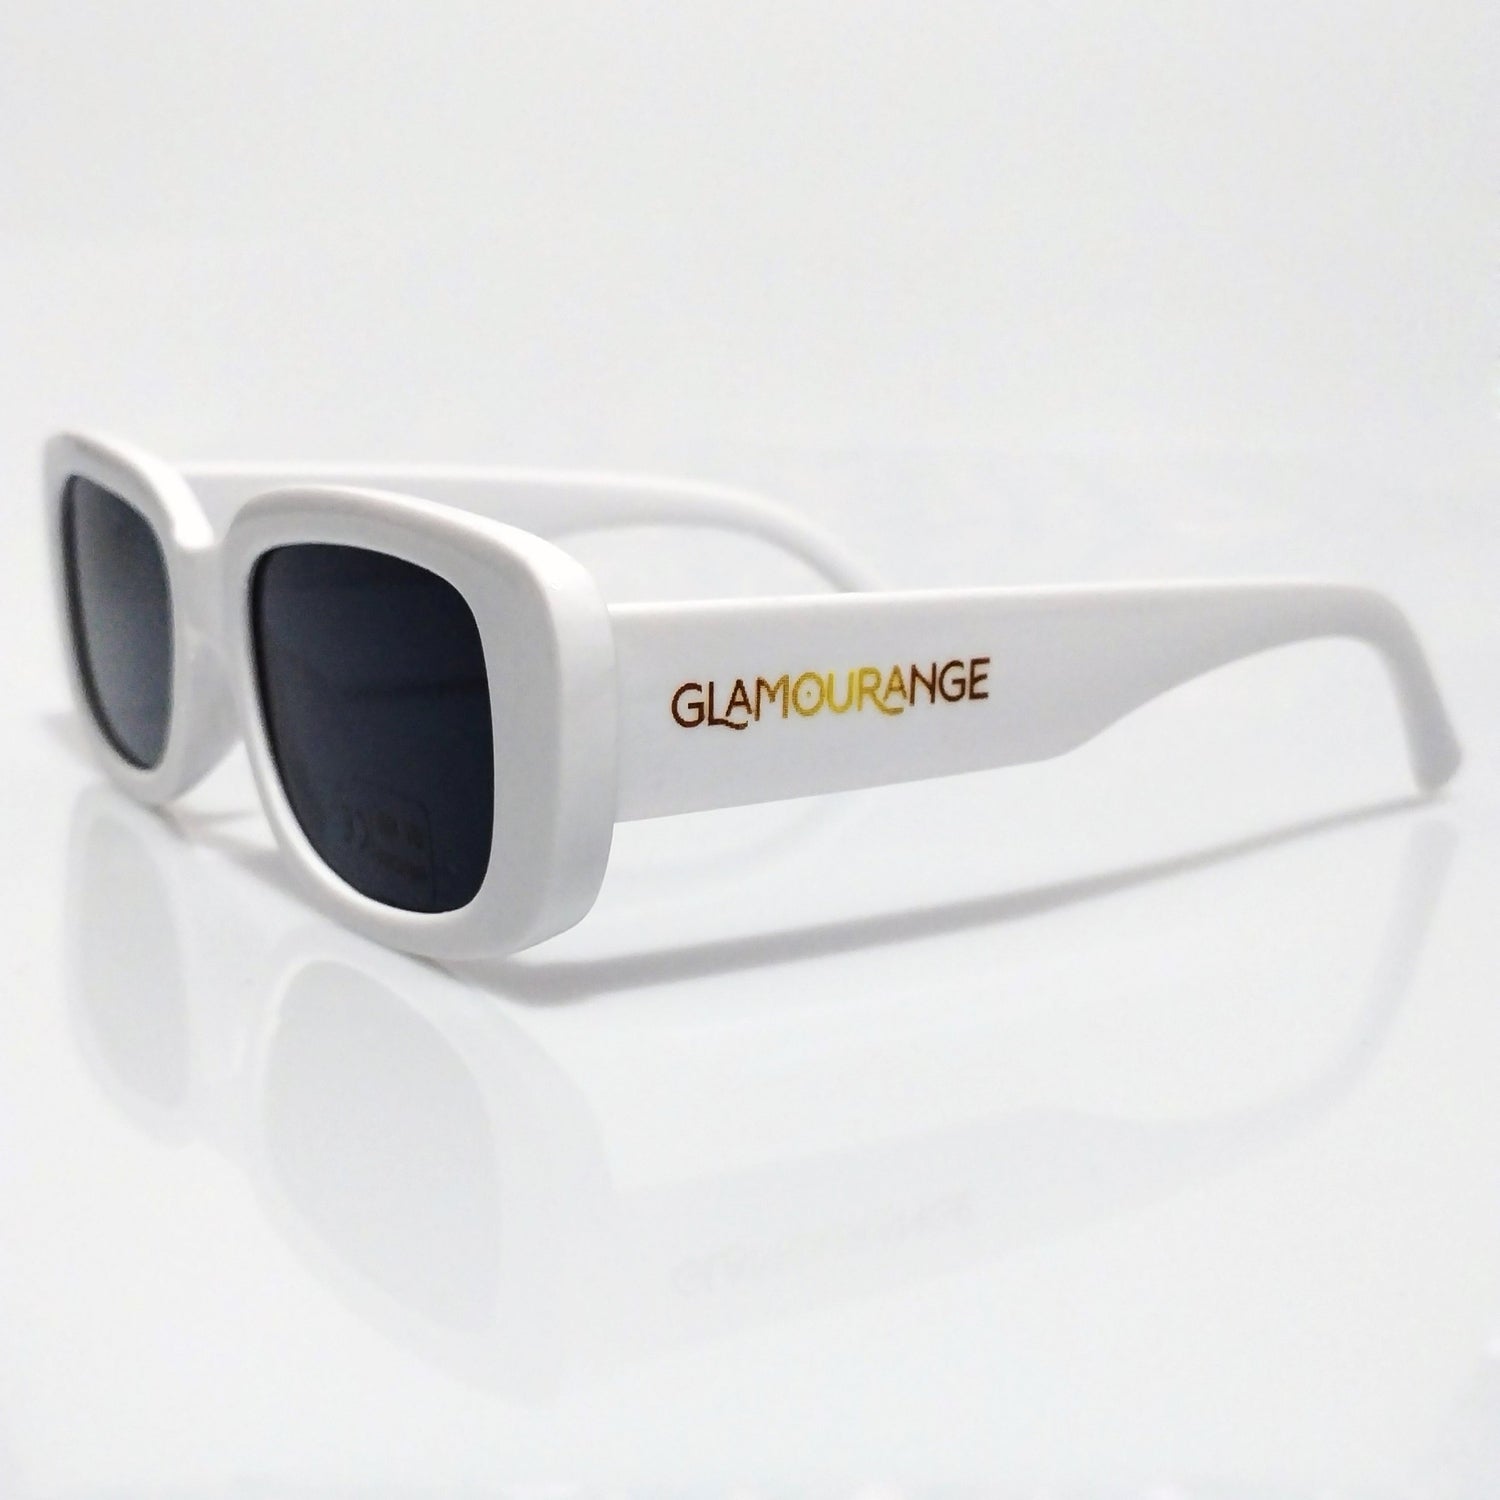 Glamourange Fashion and Apparel All New Arrivals Collection